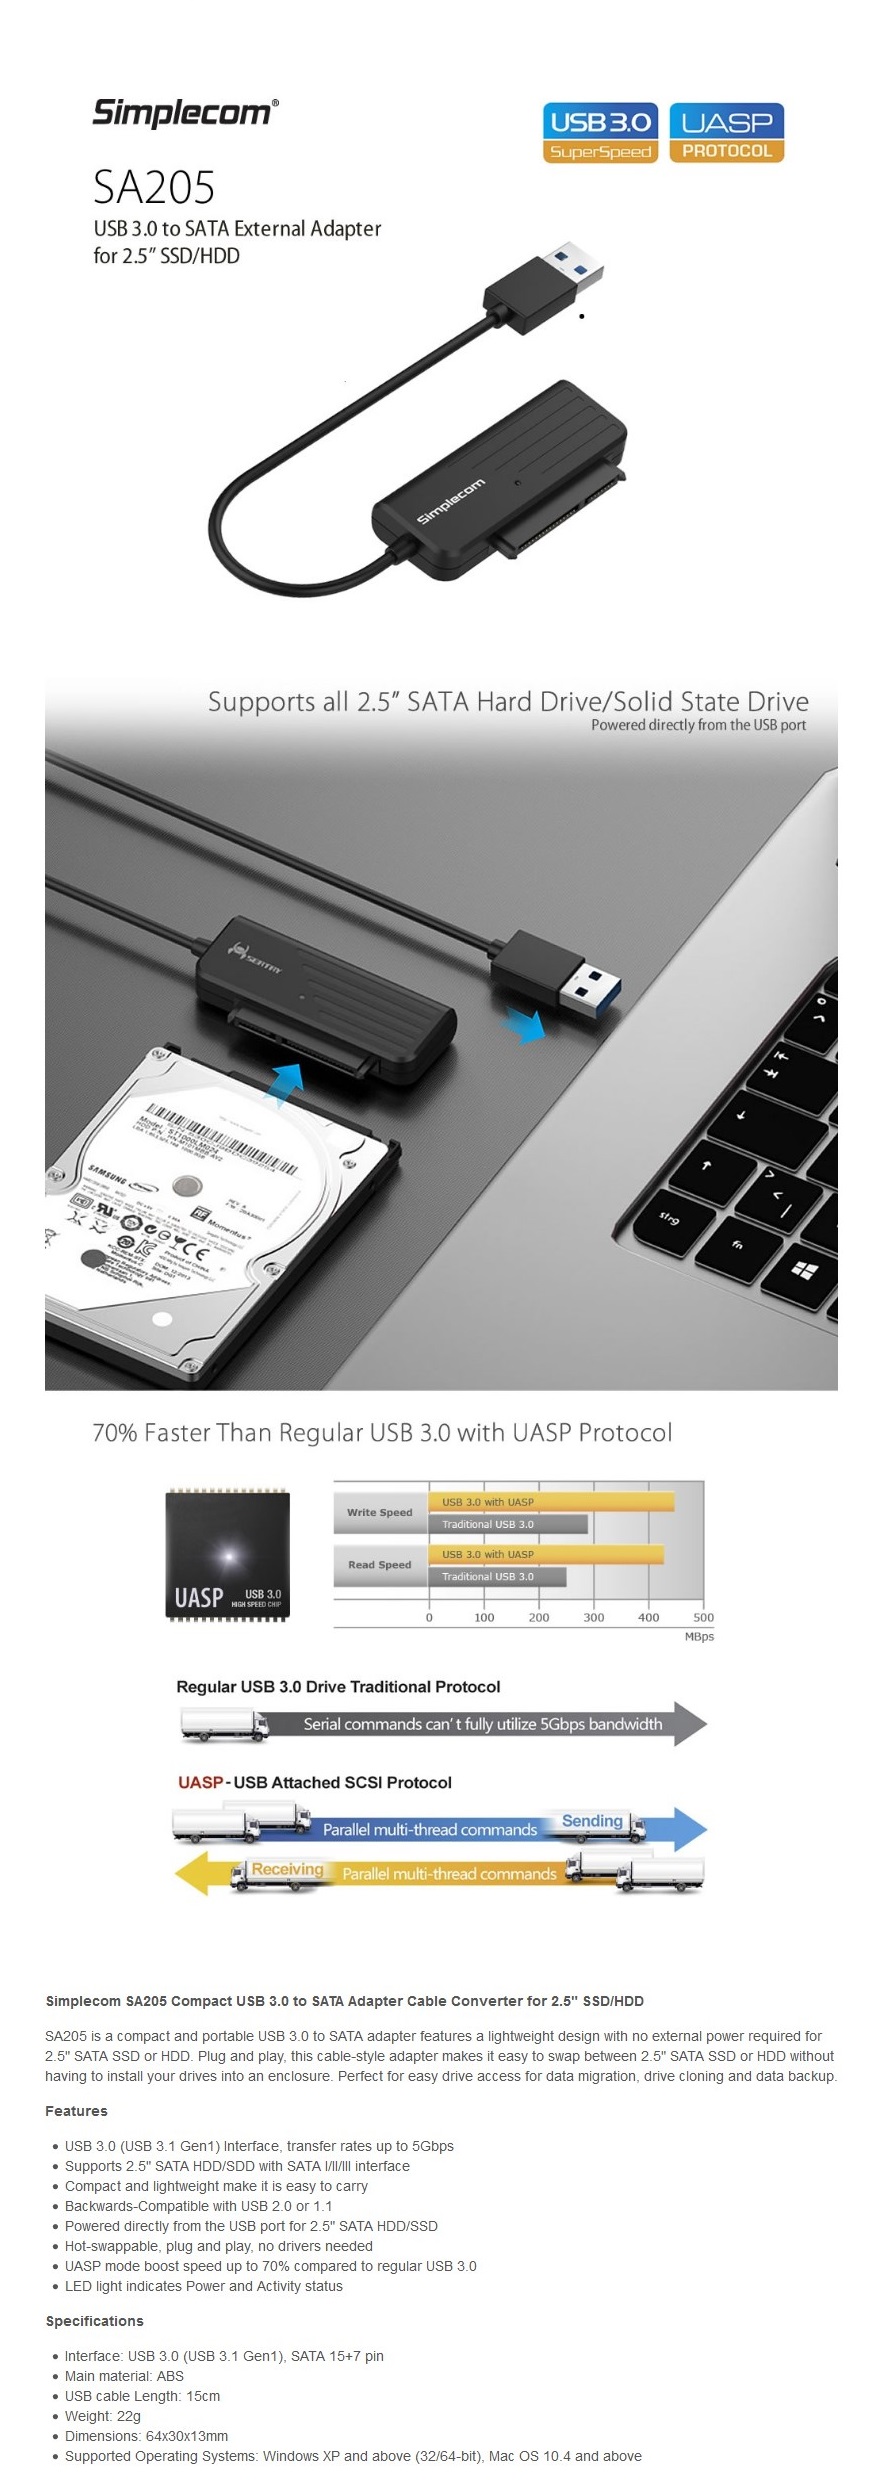 A large marketing image providing additional information about the product Simplecom SA205 Compact USB-A 3.0 to SATA External Adapter Cable Converter - Additional alt info not provided